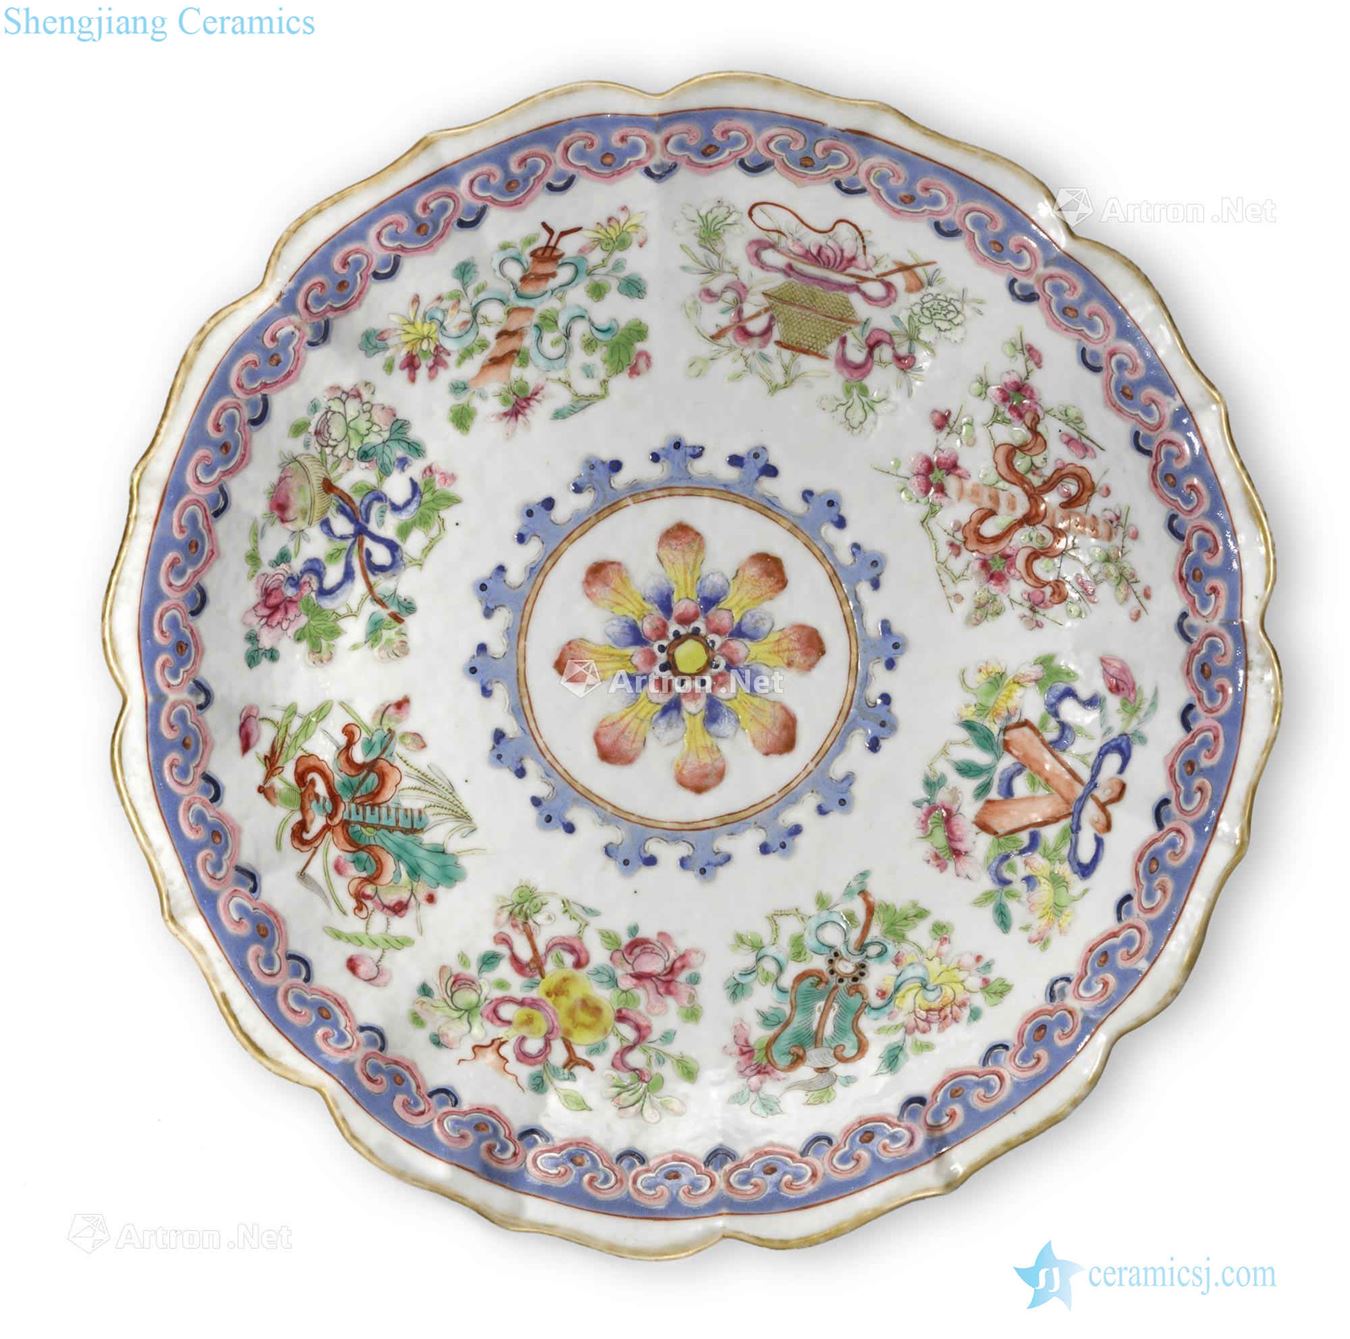 The newest the Qing/Republic period A FAMILLE ROSE ENAMELED DISH